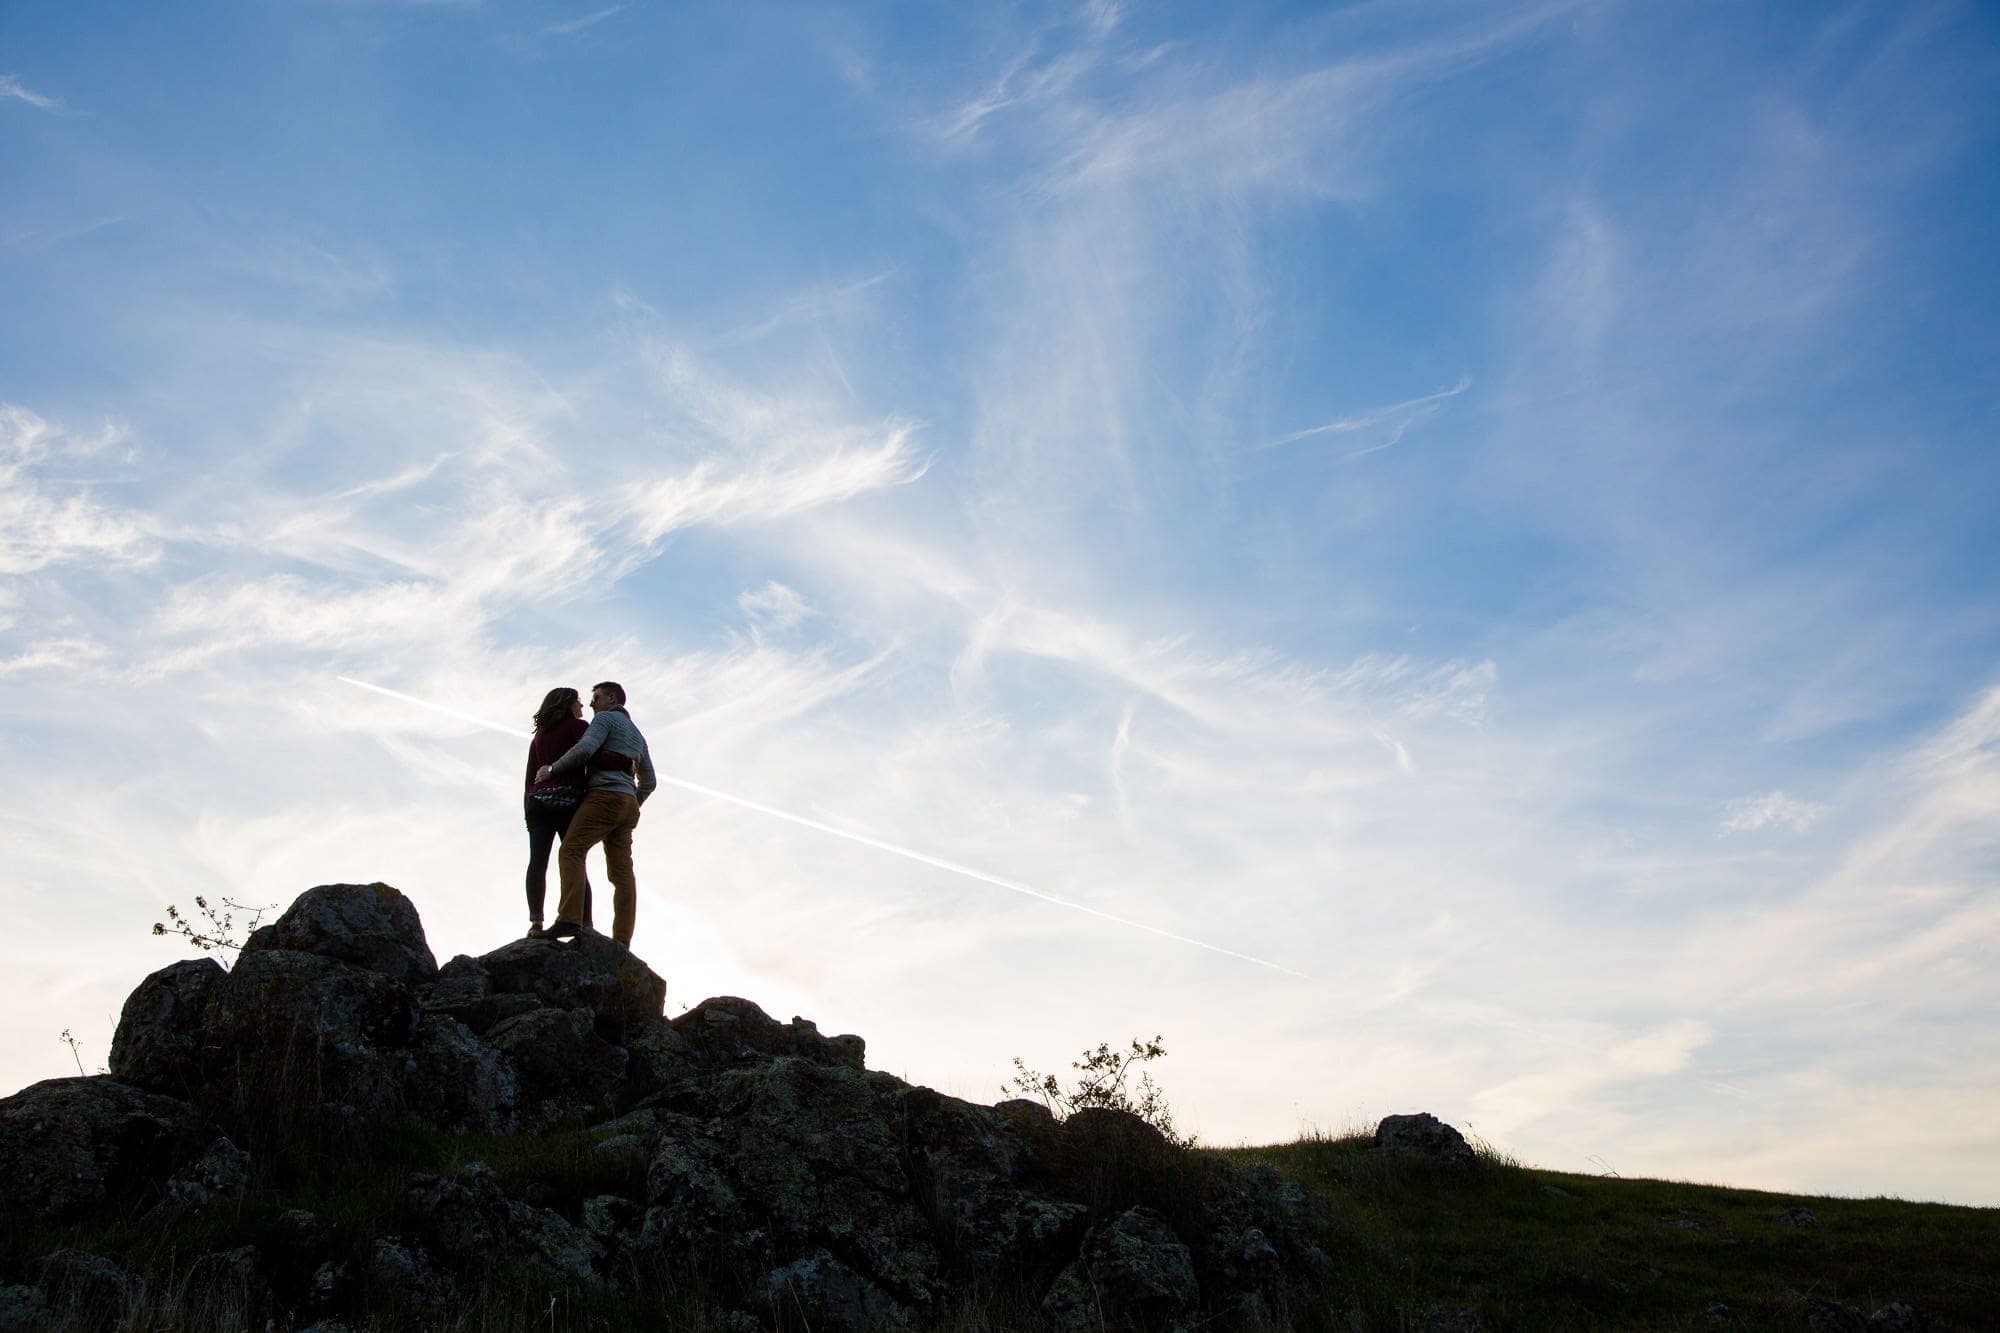 Two People standing on rocks silhouetted against blue sky with clouds